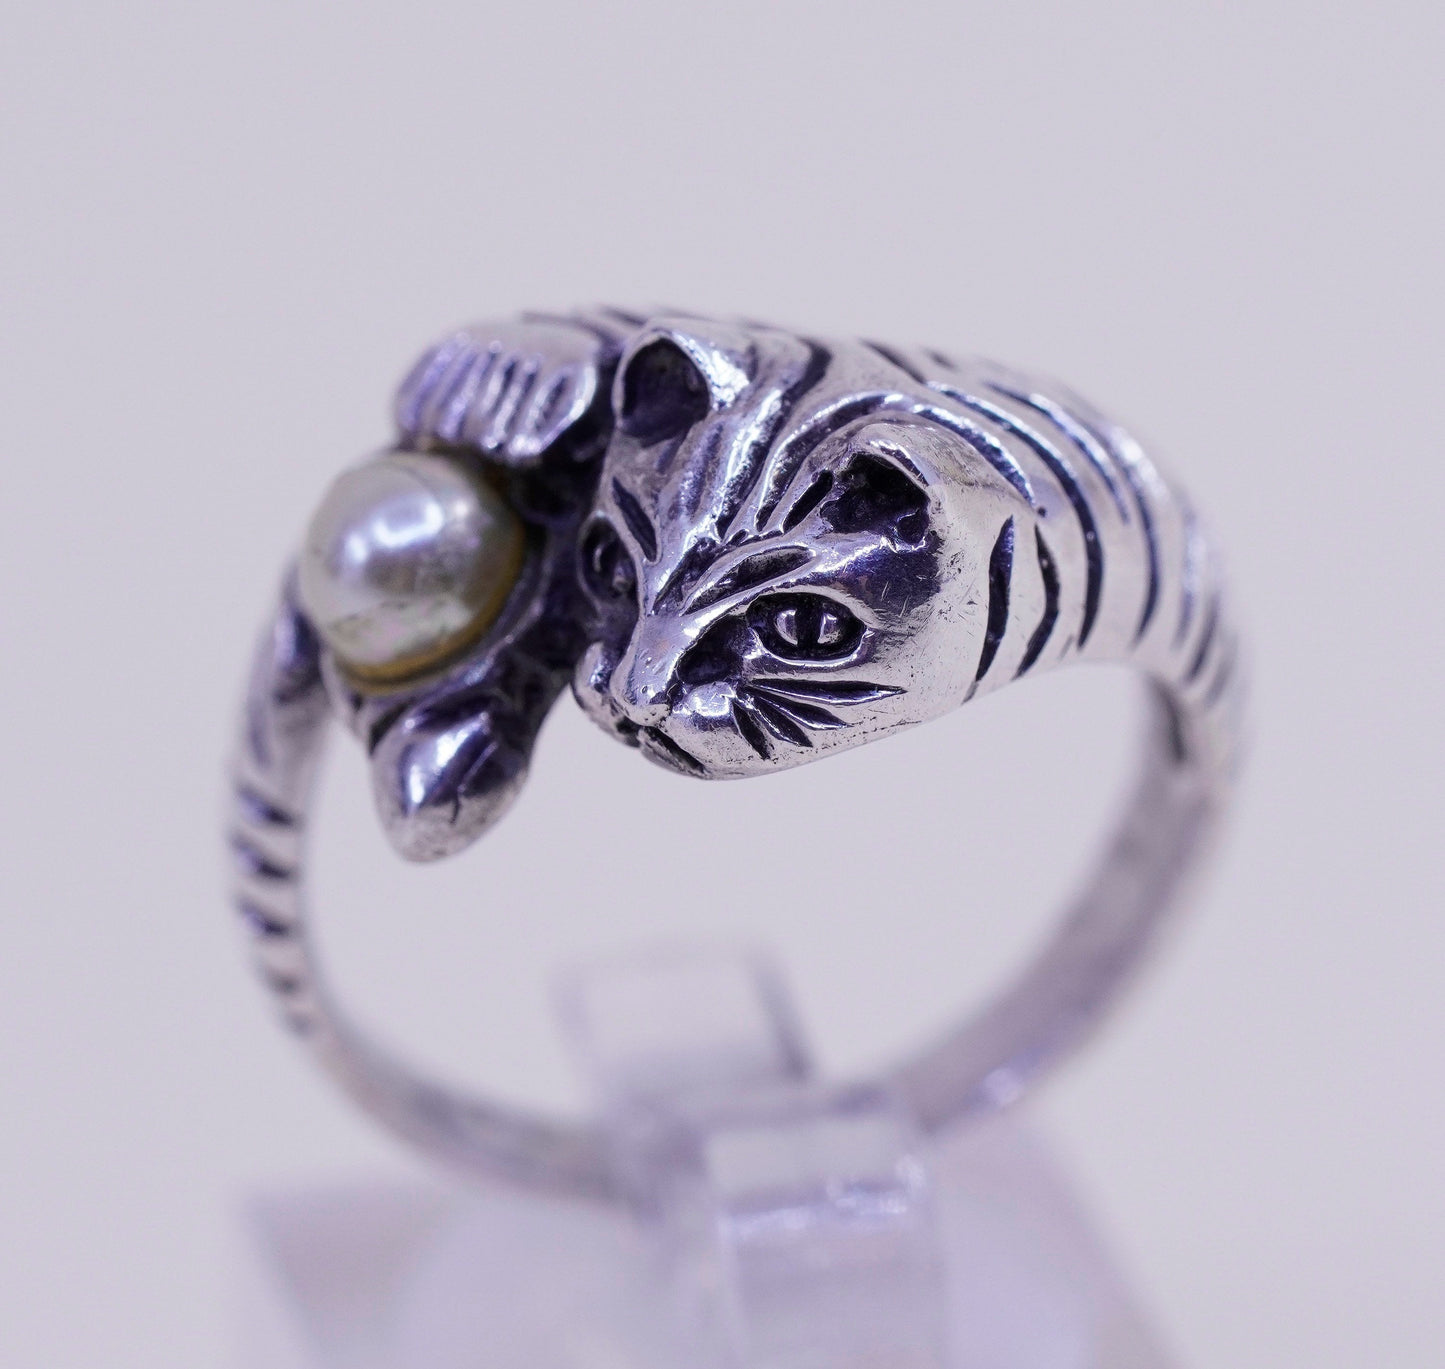 Size 9, vintage Sterling 925 silver handmade cat ring with faux pearl